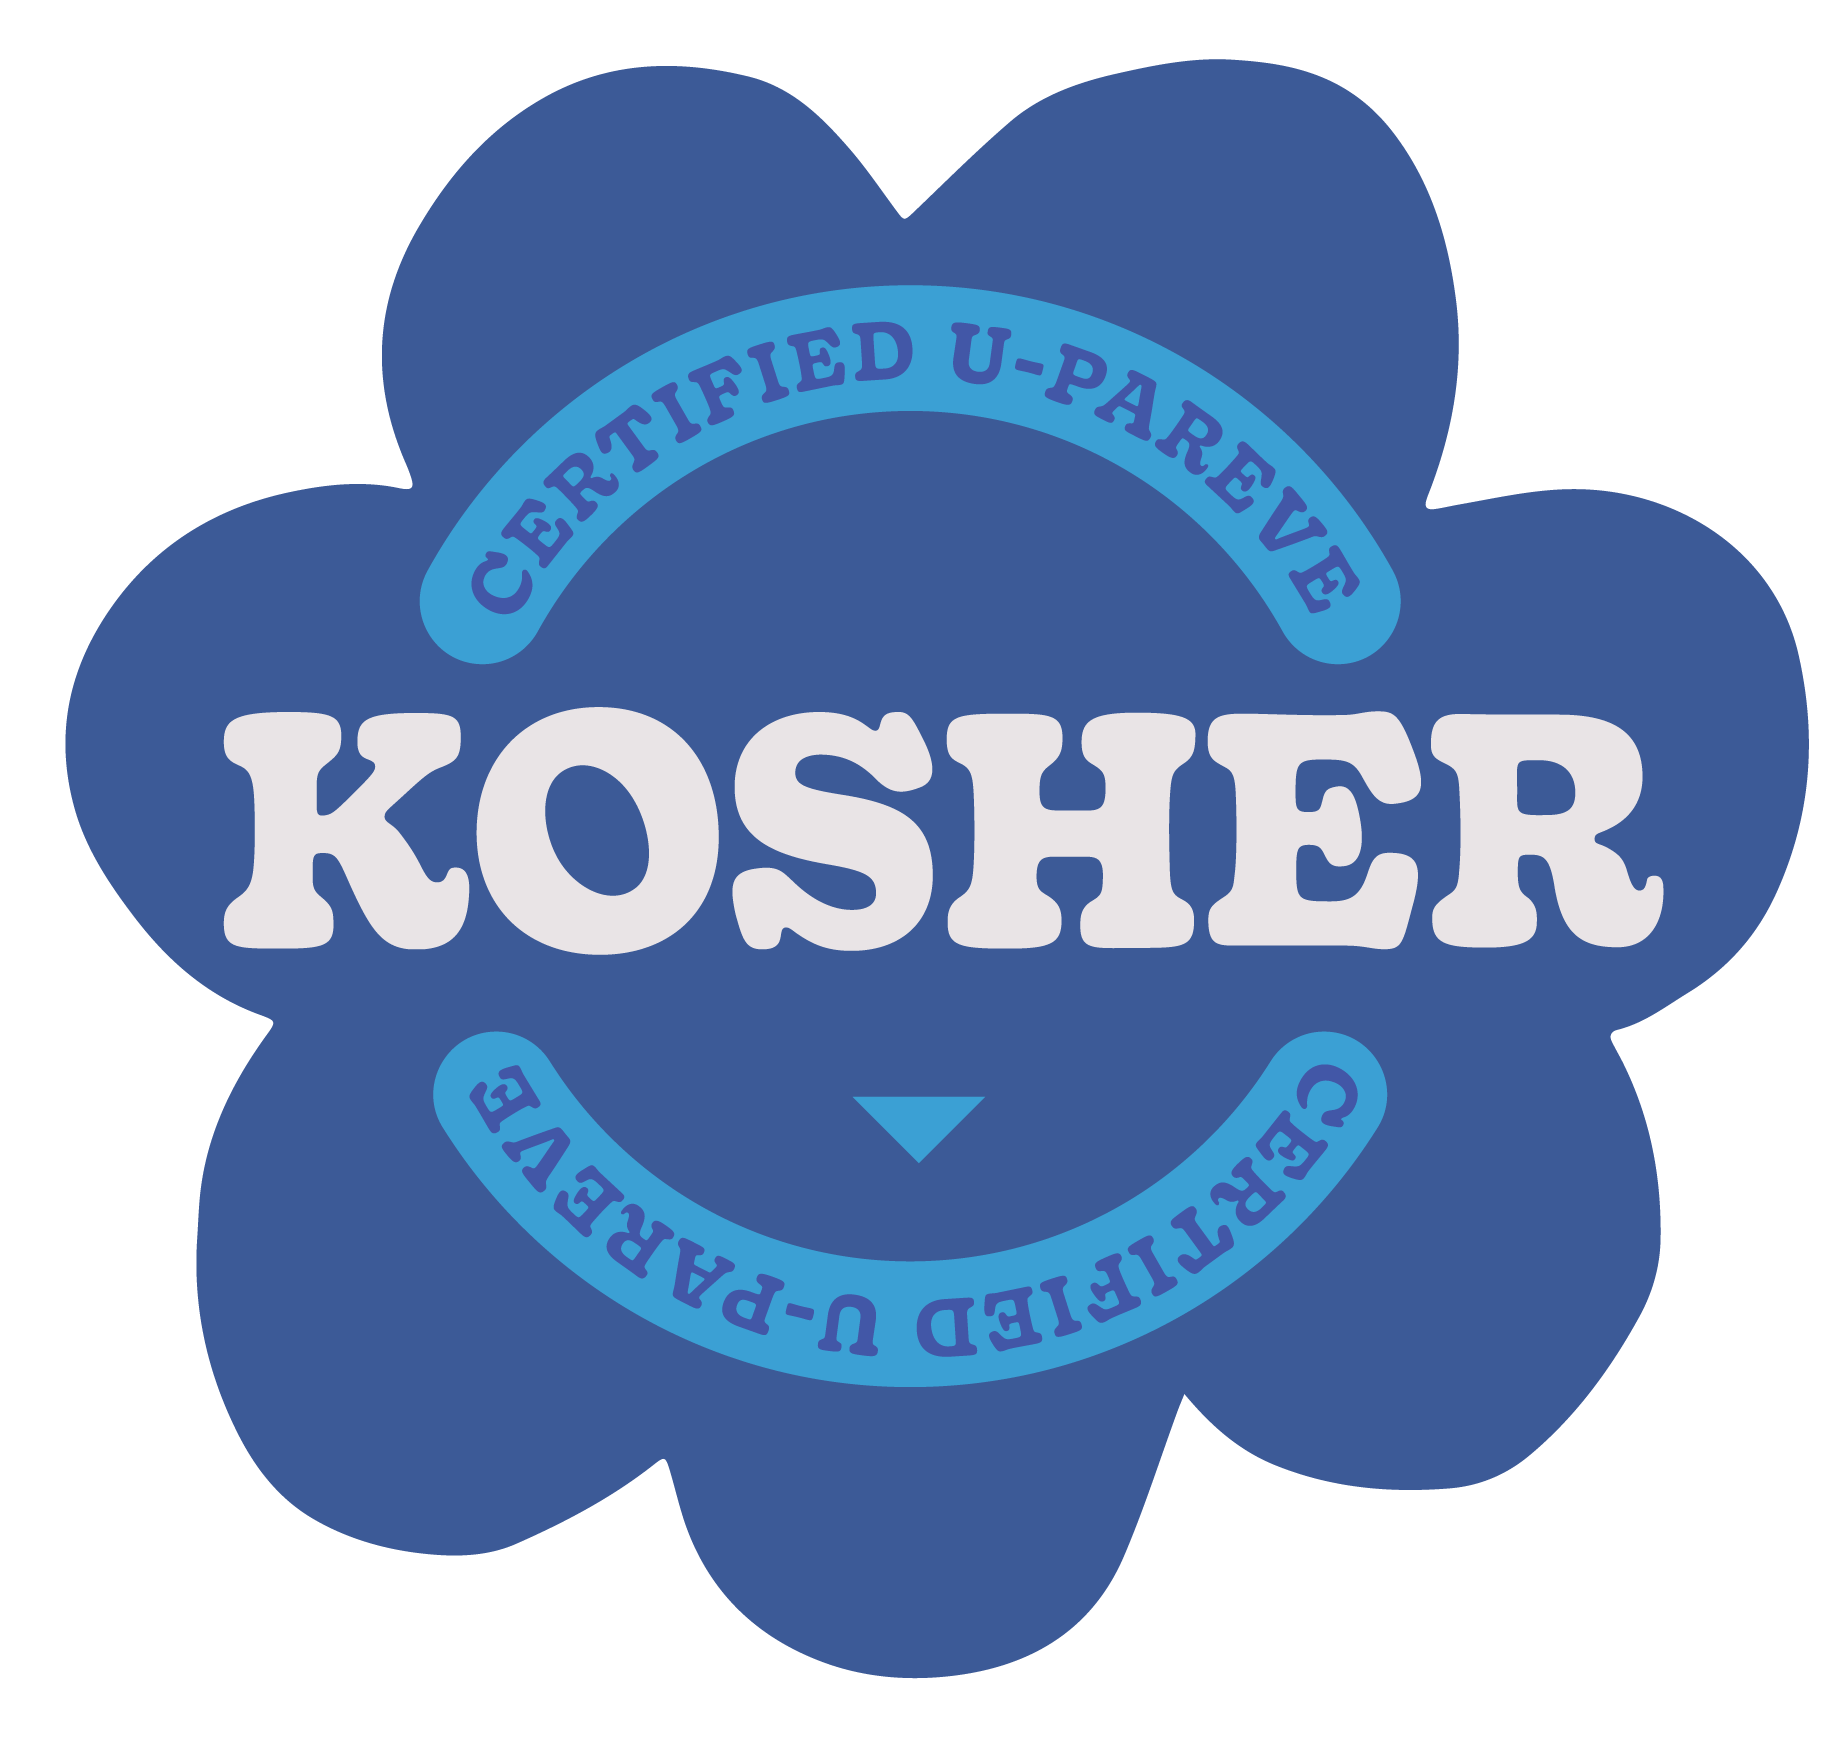 Certified U-Pareve Kosher sticker. Sticker is shaped like a flower with seven rounded petals. Sticker is blue, with light blue banner and white font in center.